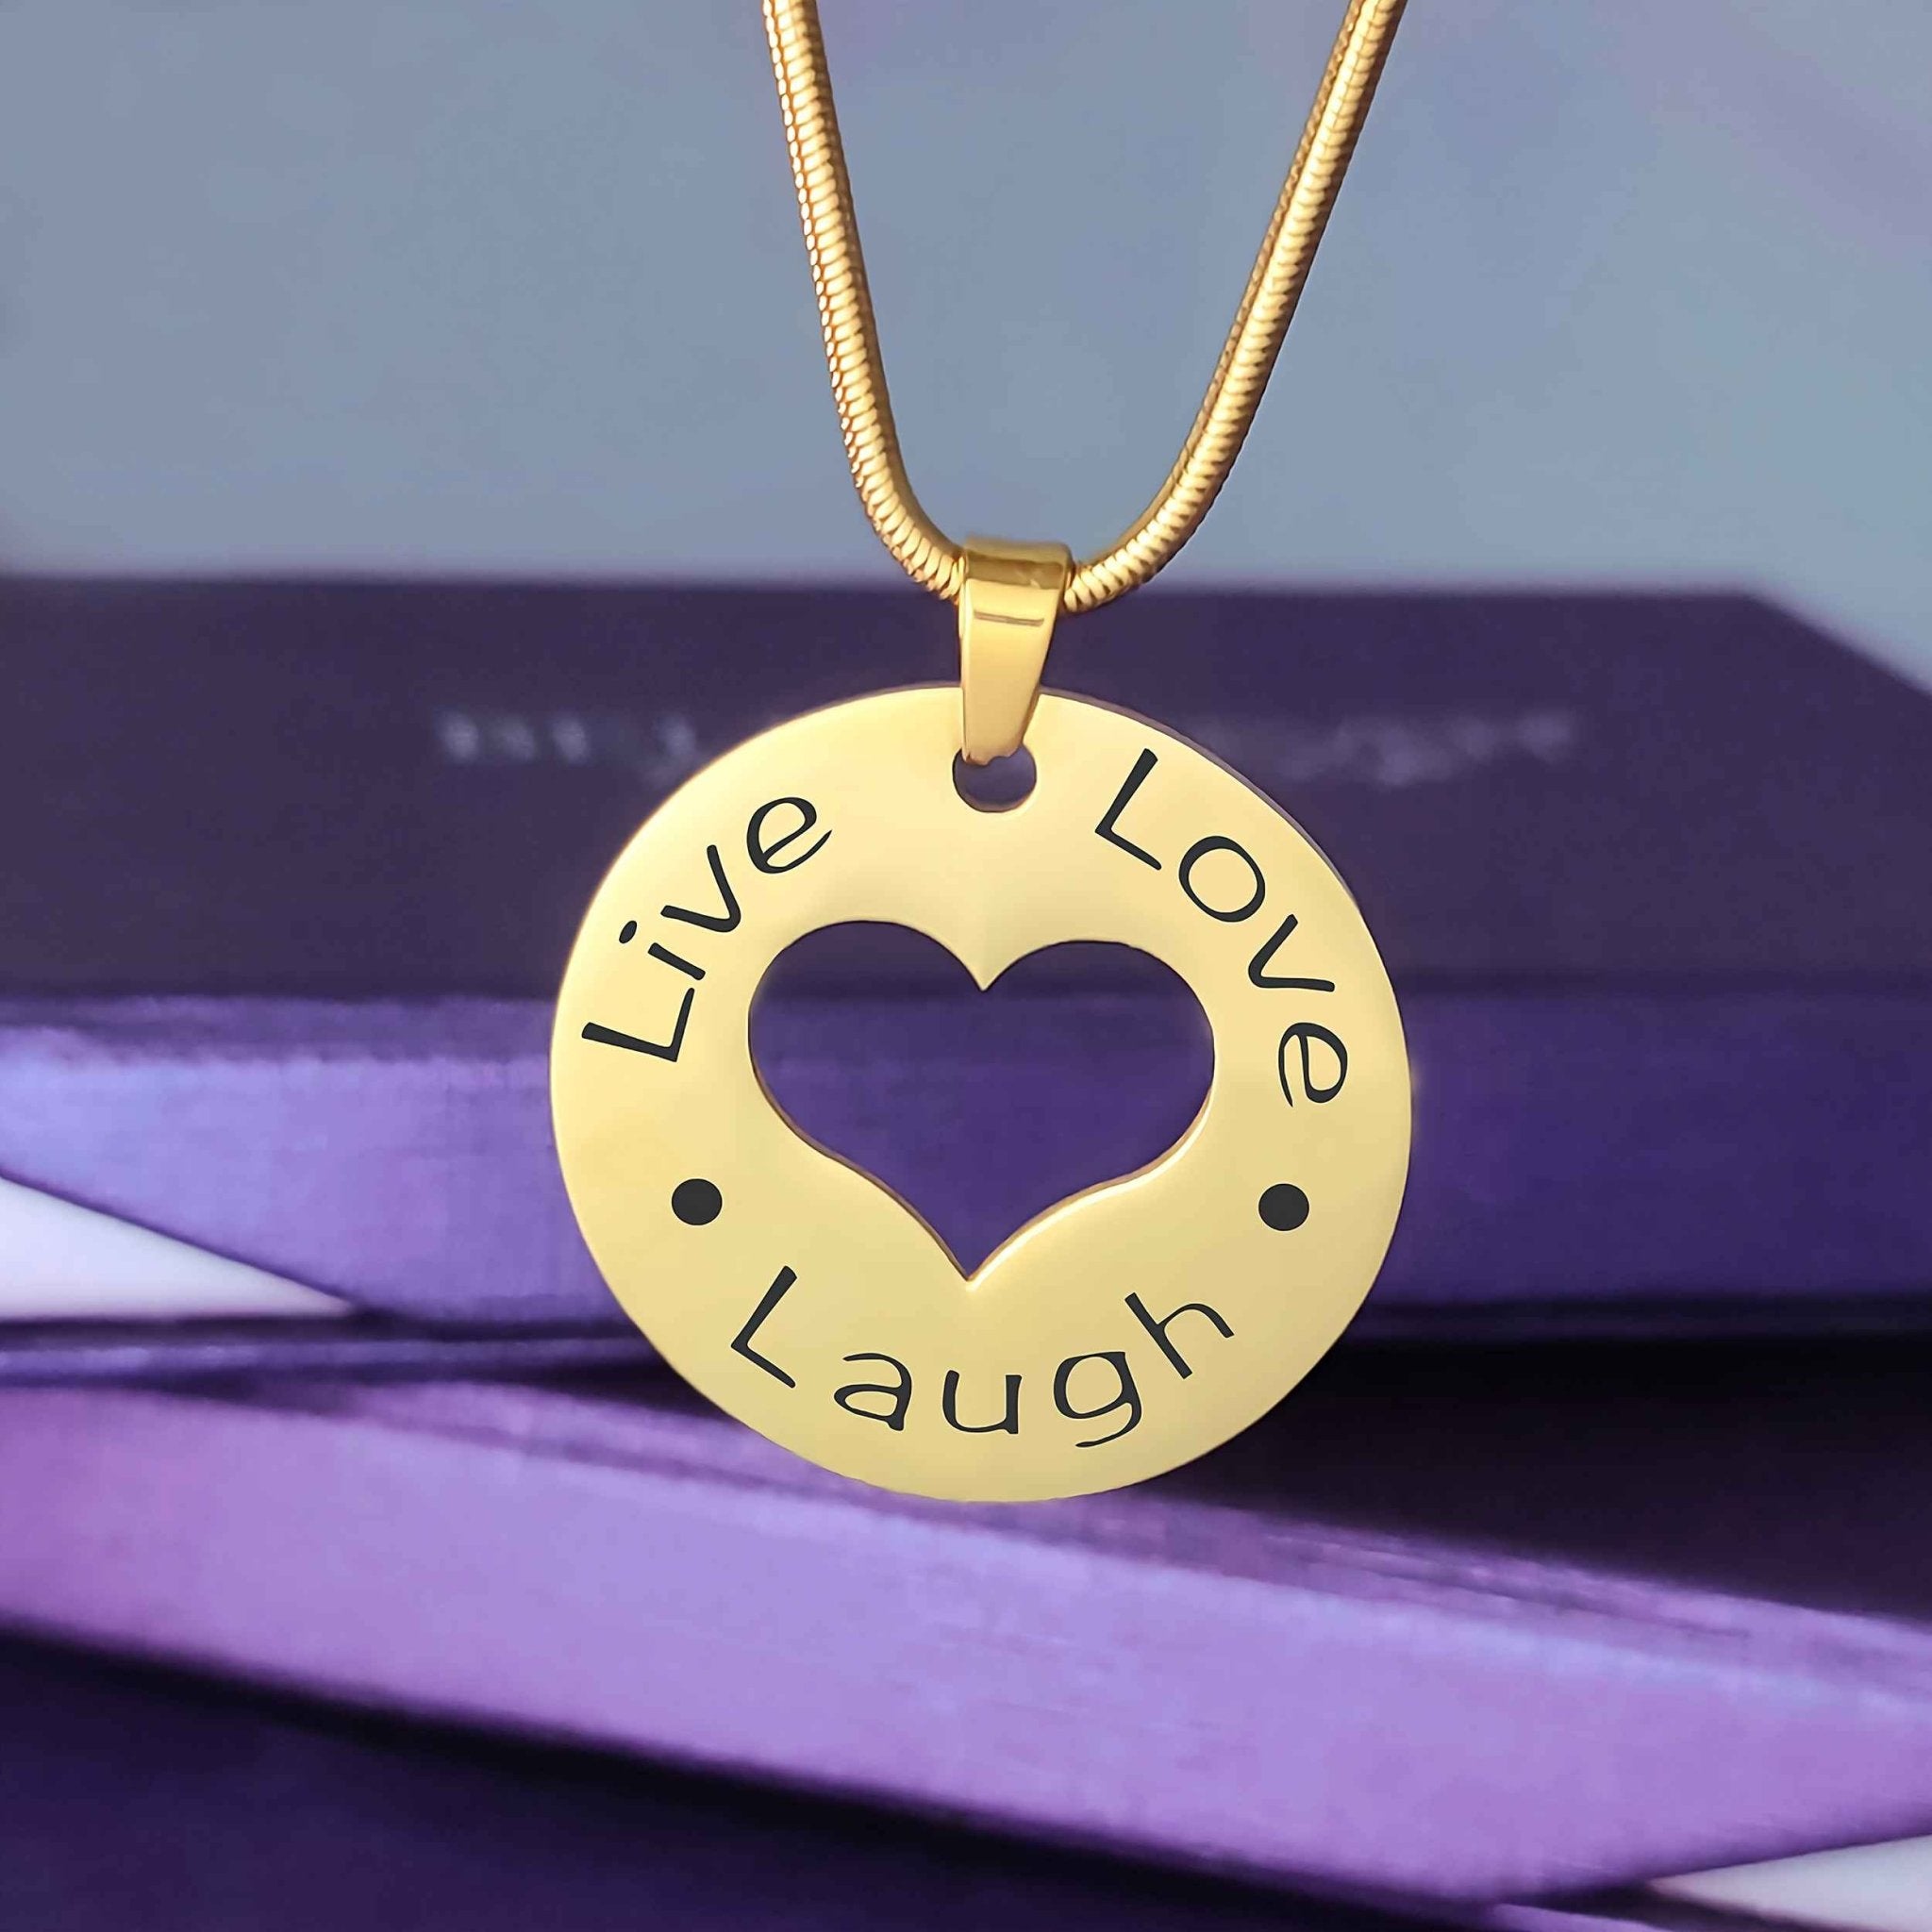 Live Laugh Love Cut Out Necklace - Mothers Jewellery by Belle Fever